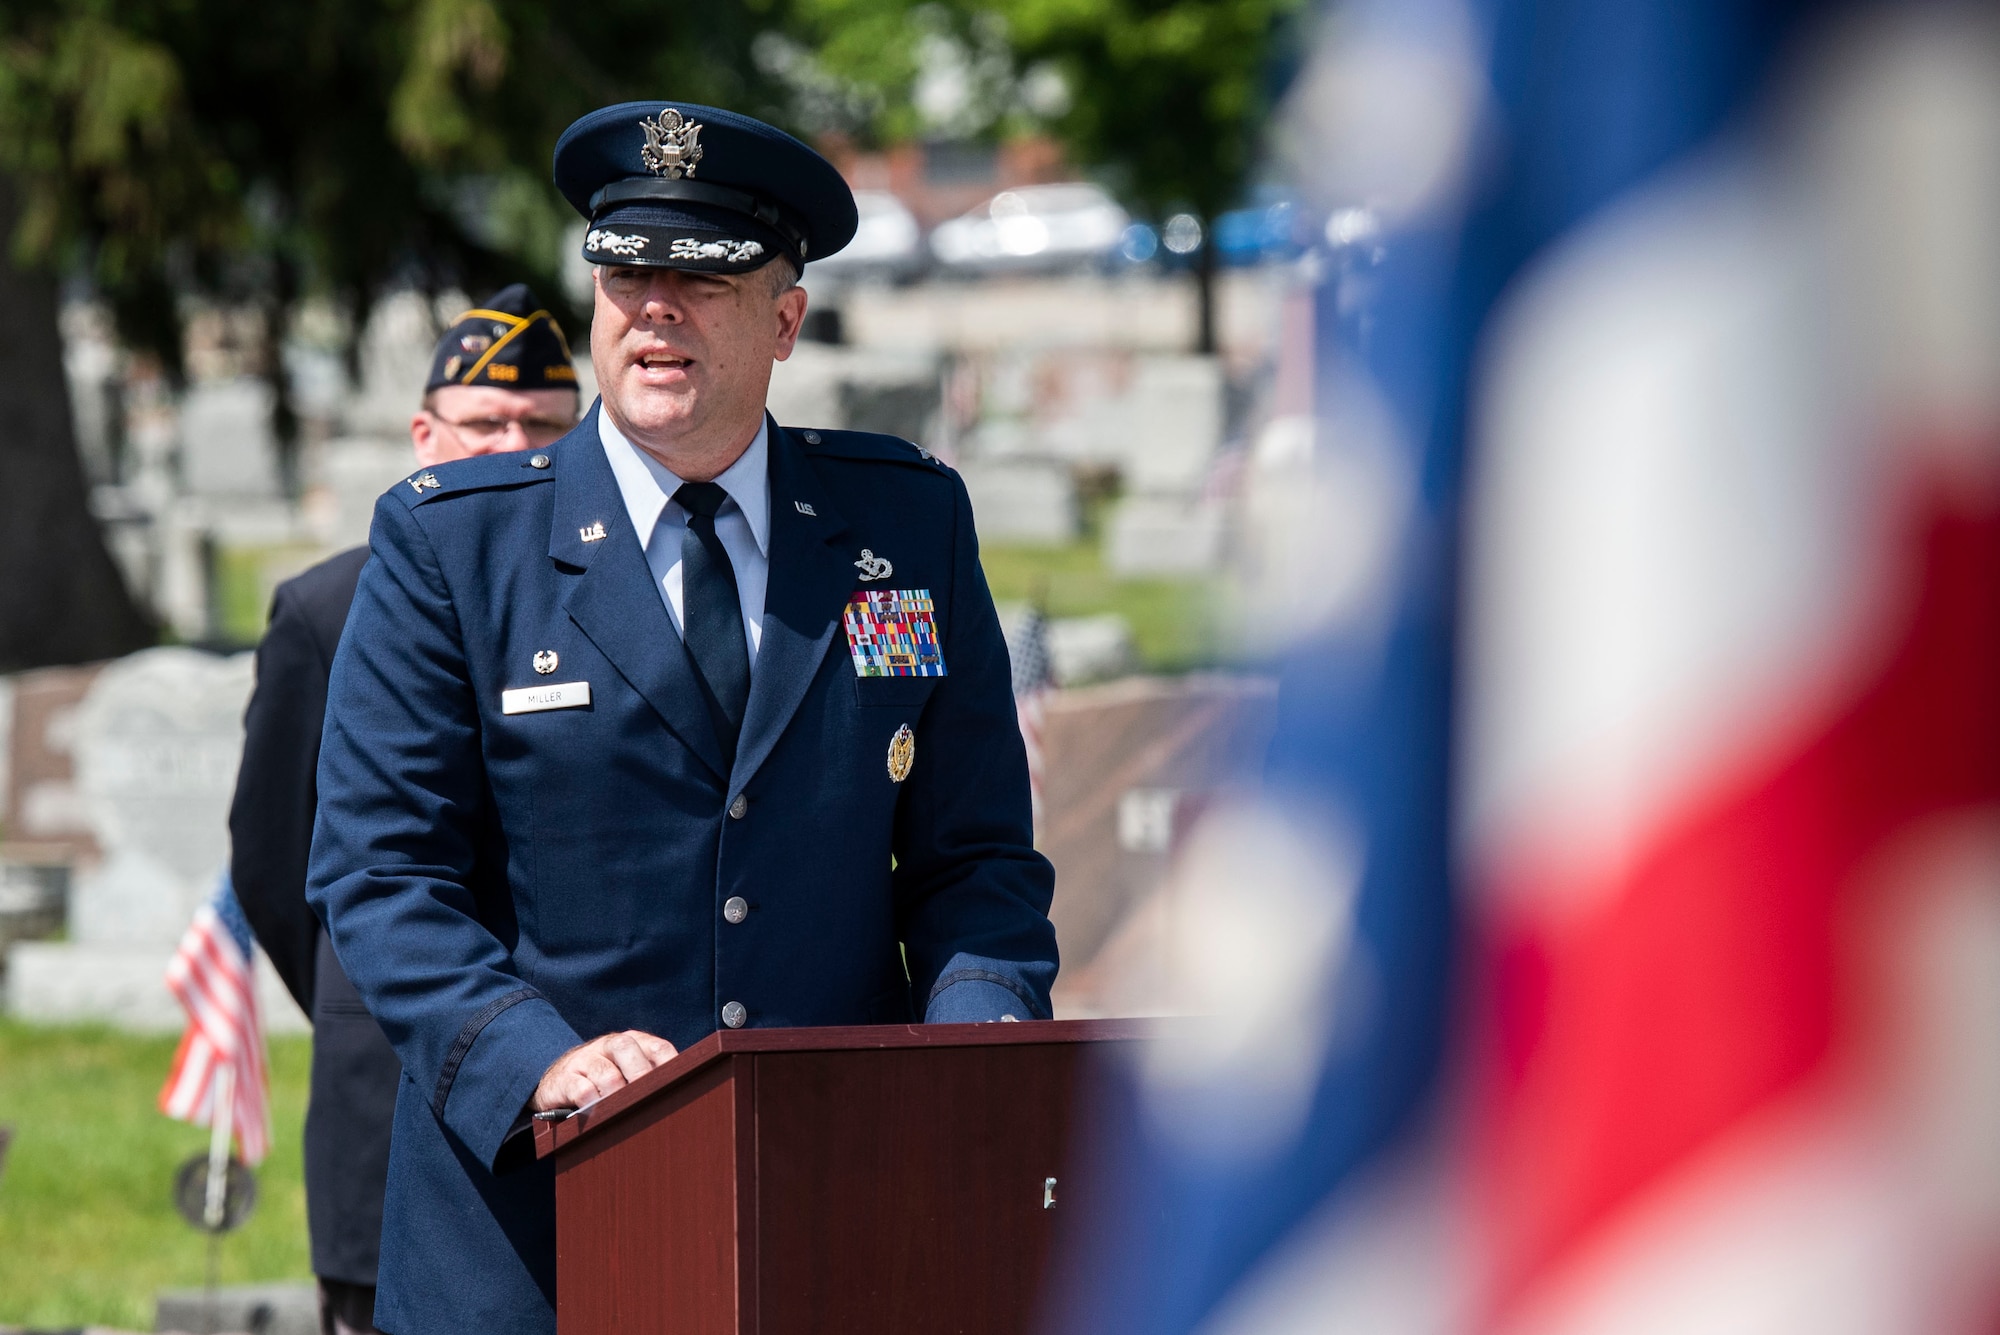 U.S. Air Force Col. Patrick Miller, 88th Air Base Wing and Wright-Patterson Air Force Base, Ohio, installation commander, delivers remarks as the keynote speaker during a Memorial Day ceremony in Fairborn, Ohio, May 31, 2021. Established in 1971, Memorial Day is an official federal holiday meant to allow people to honor the men and women who have died while on duty with the U.S. Military. (U.S. Air Force photo by Wesley Farnsworth)